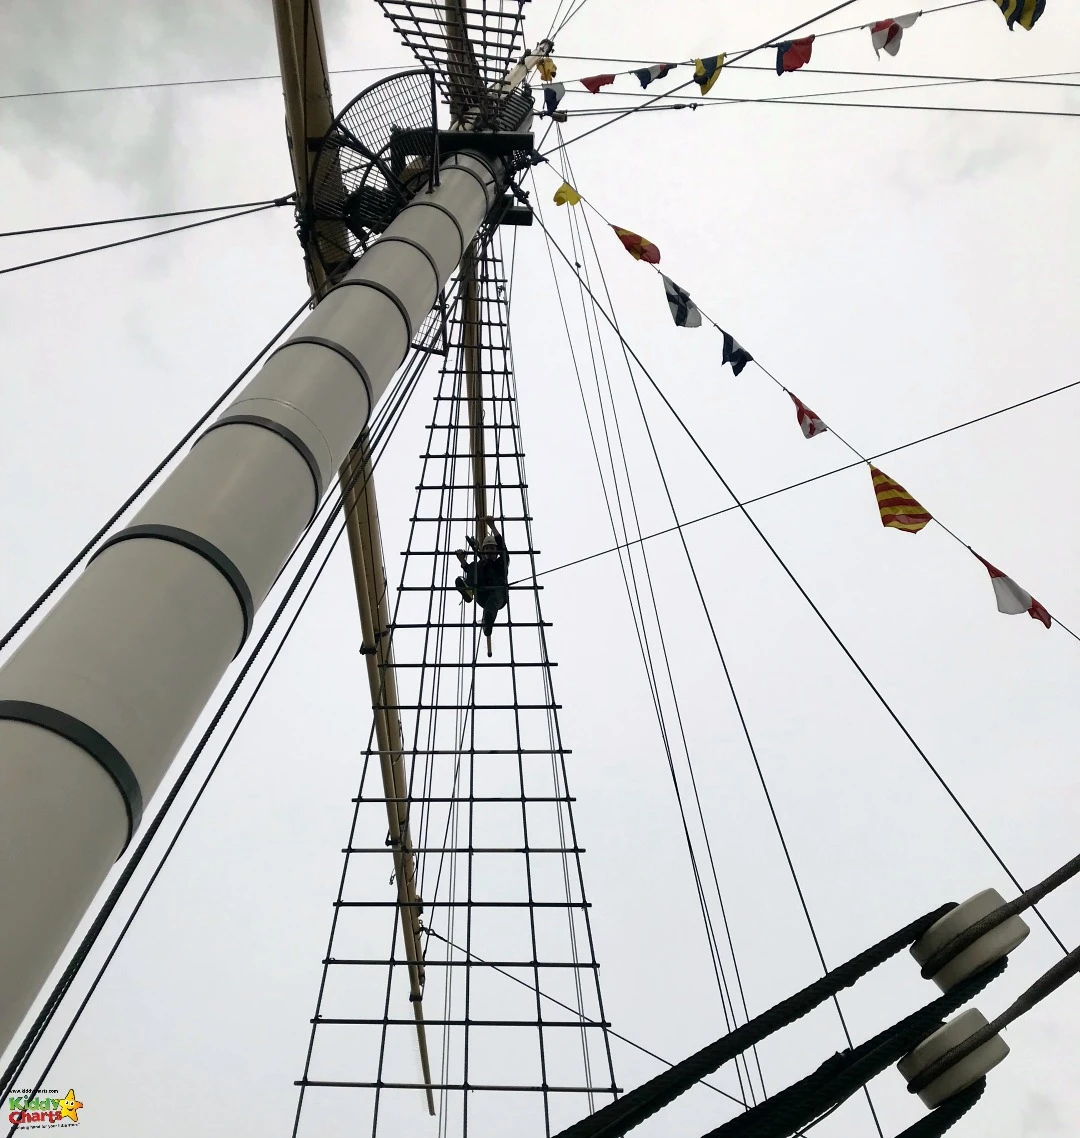 SS Great Britain - coming down the rigging #travel #uk #bristol #daysout